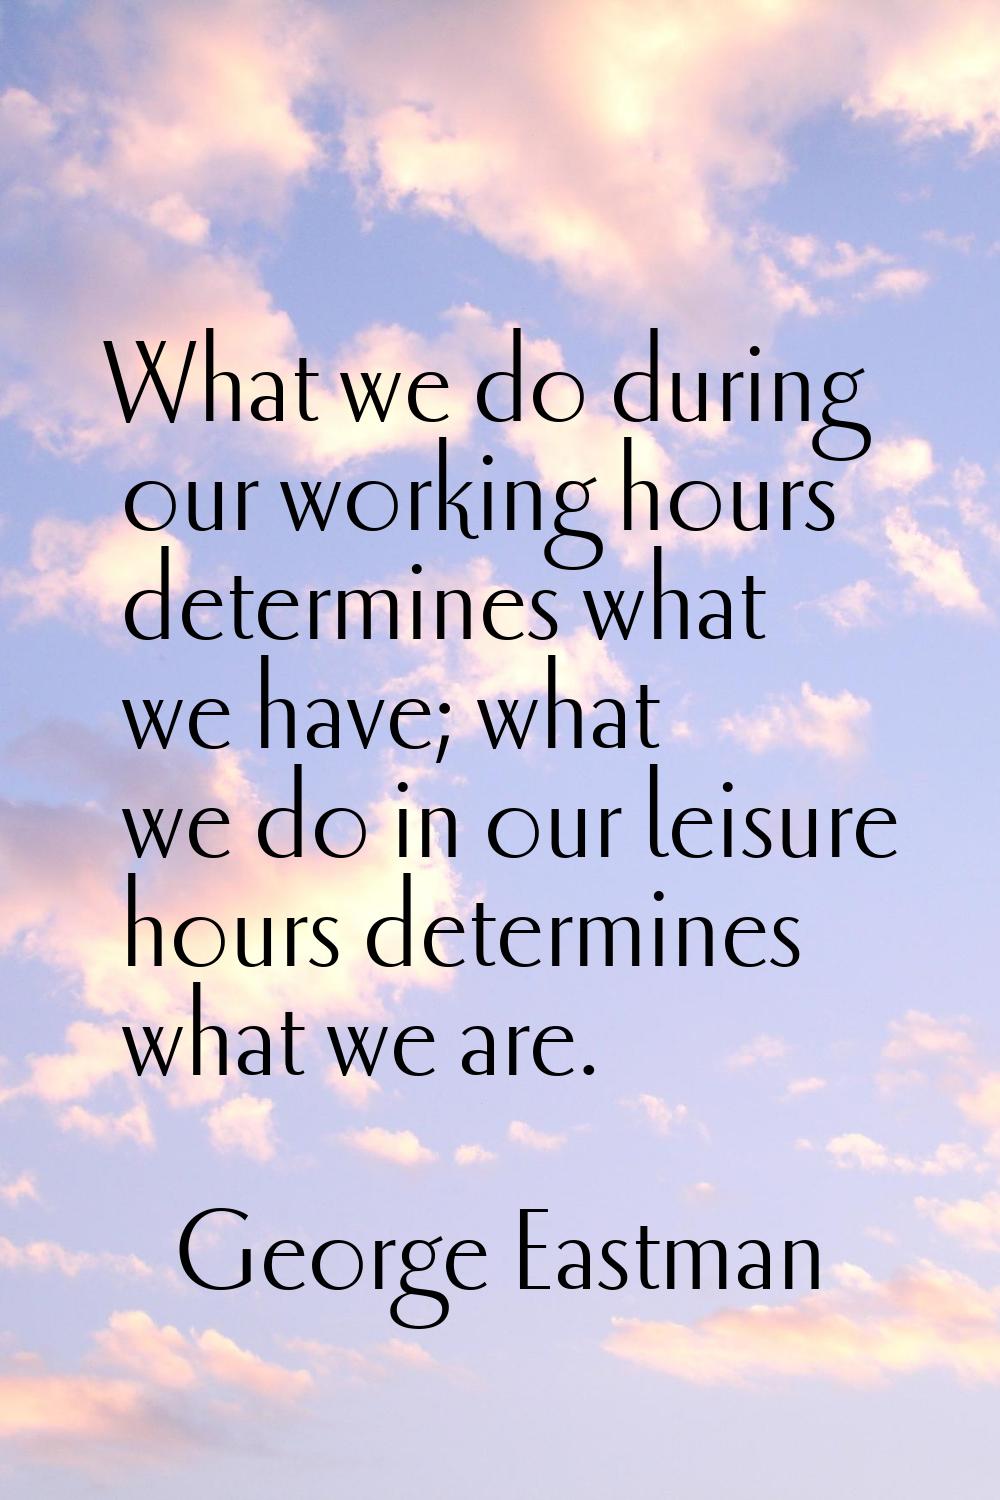 What we do during our working hours determines what we have; what we do in our leisure hours determ